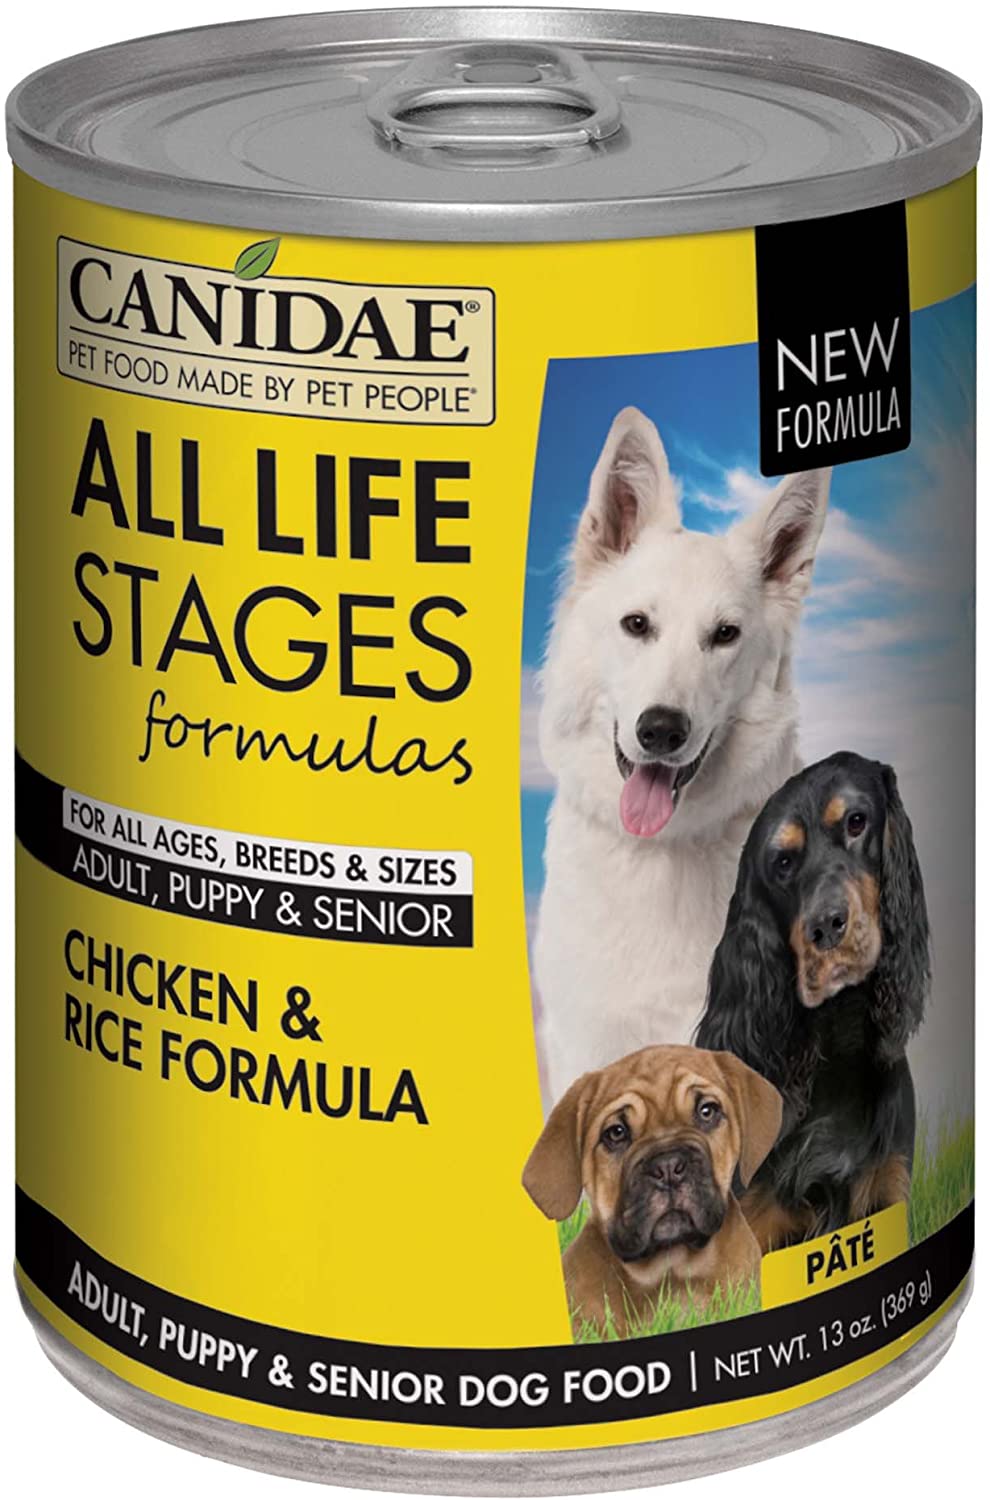 Canidae Life Stages Canned Dog Food For Puppies, Adults & Seniors